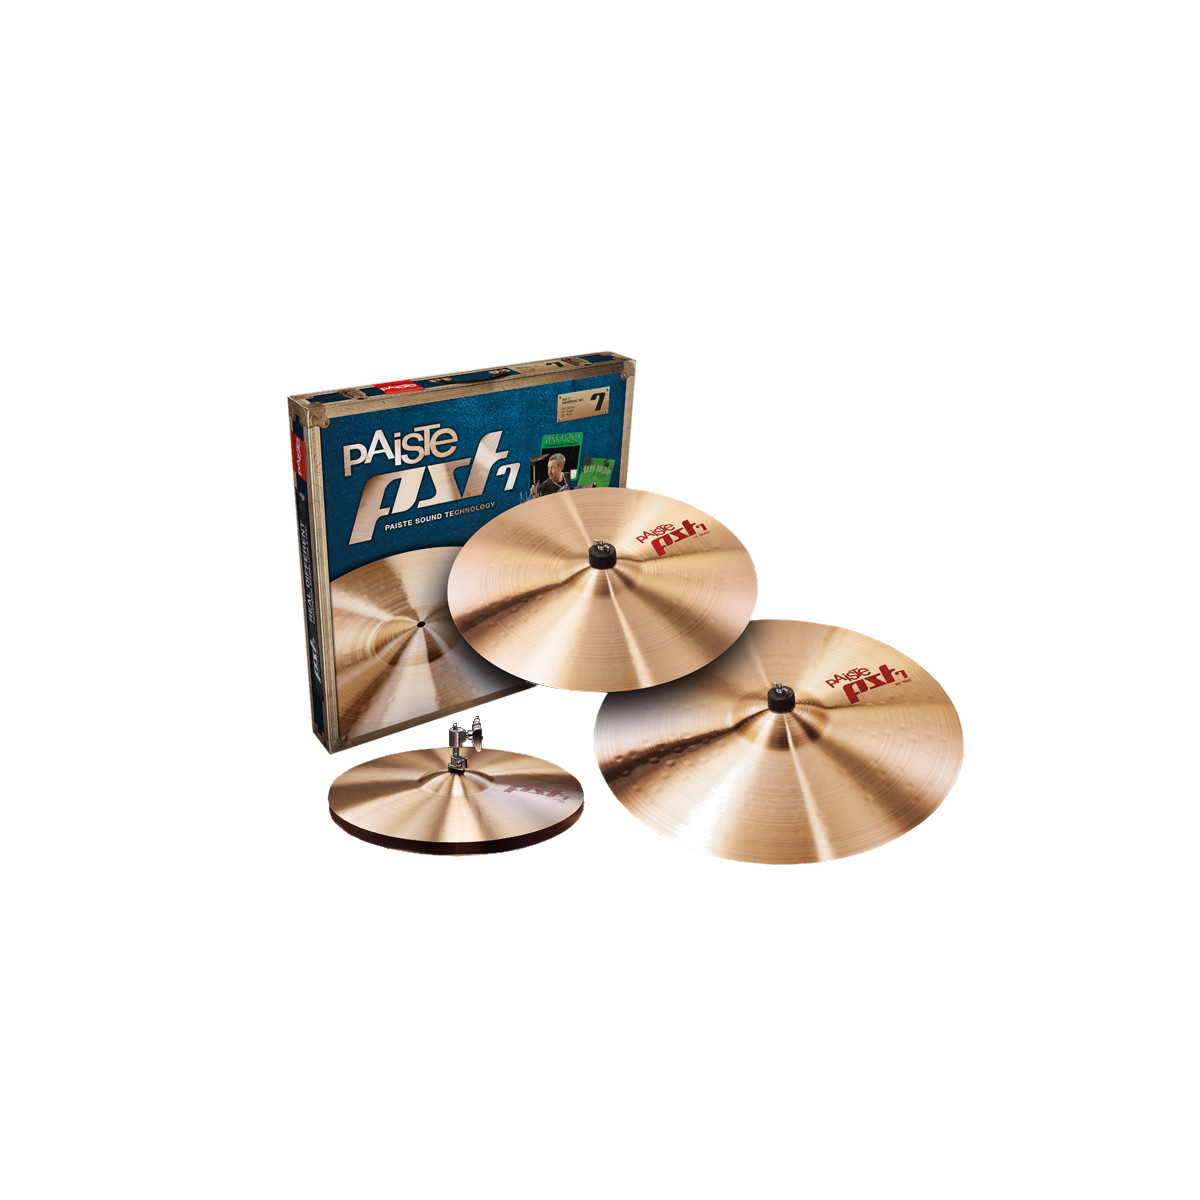 PAISTE CYMBALS PACK PST 7 SESSION (LIGHT)